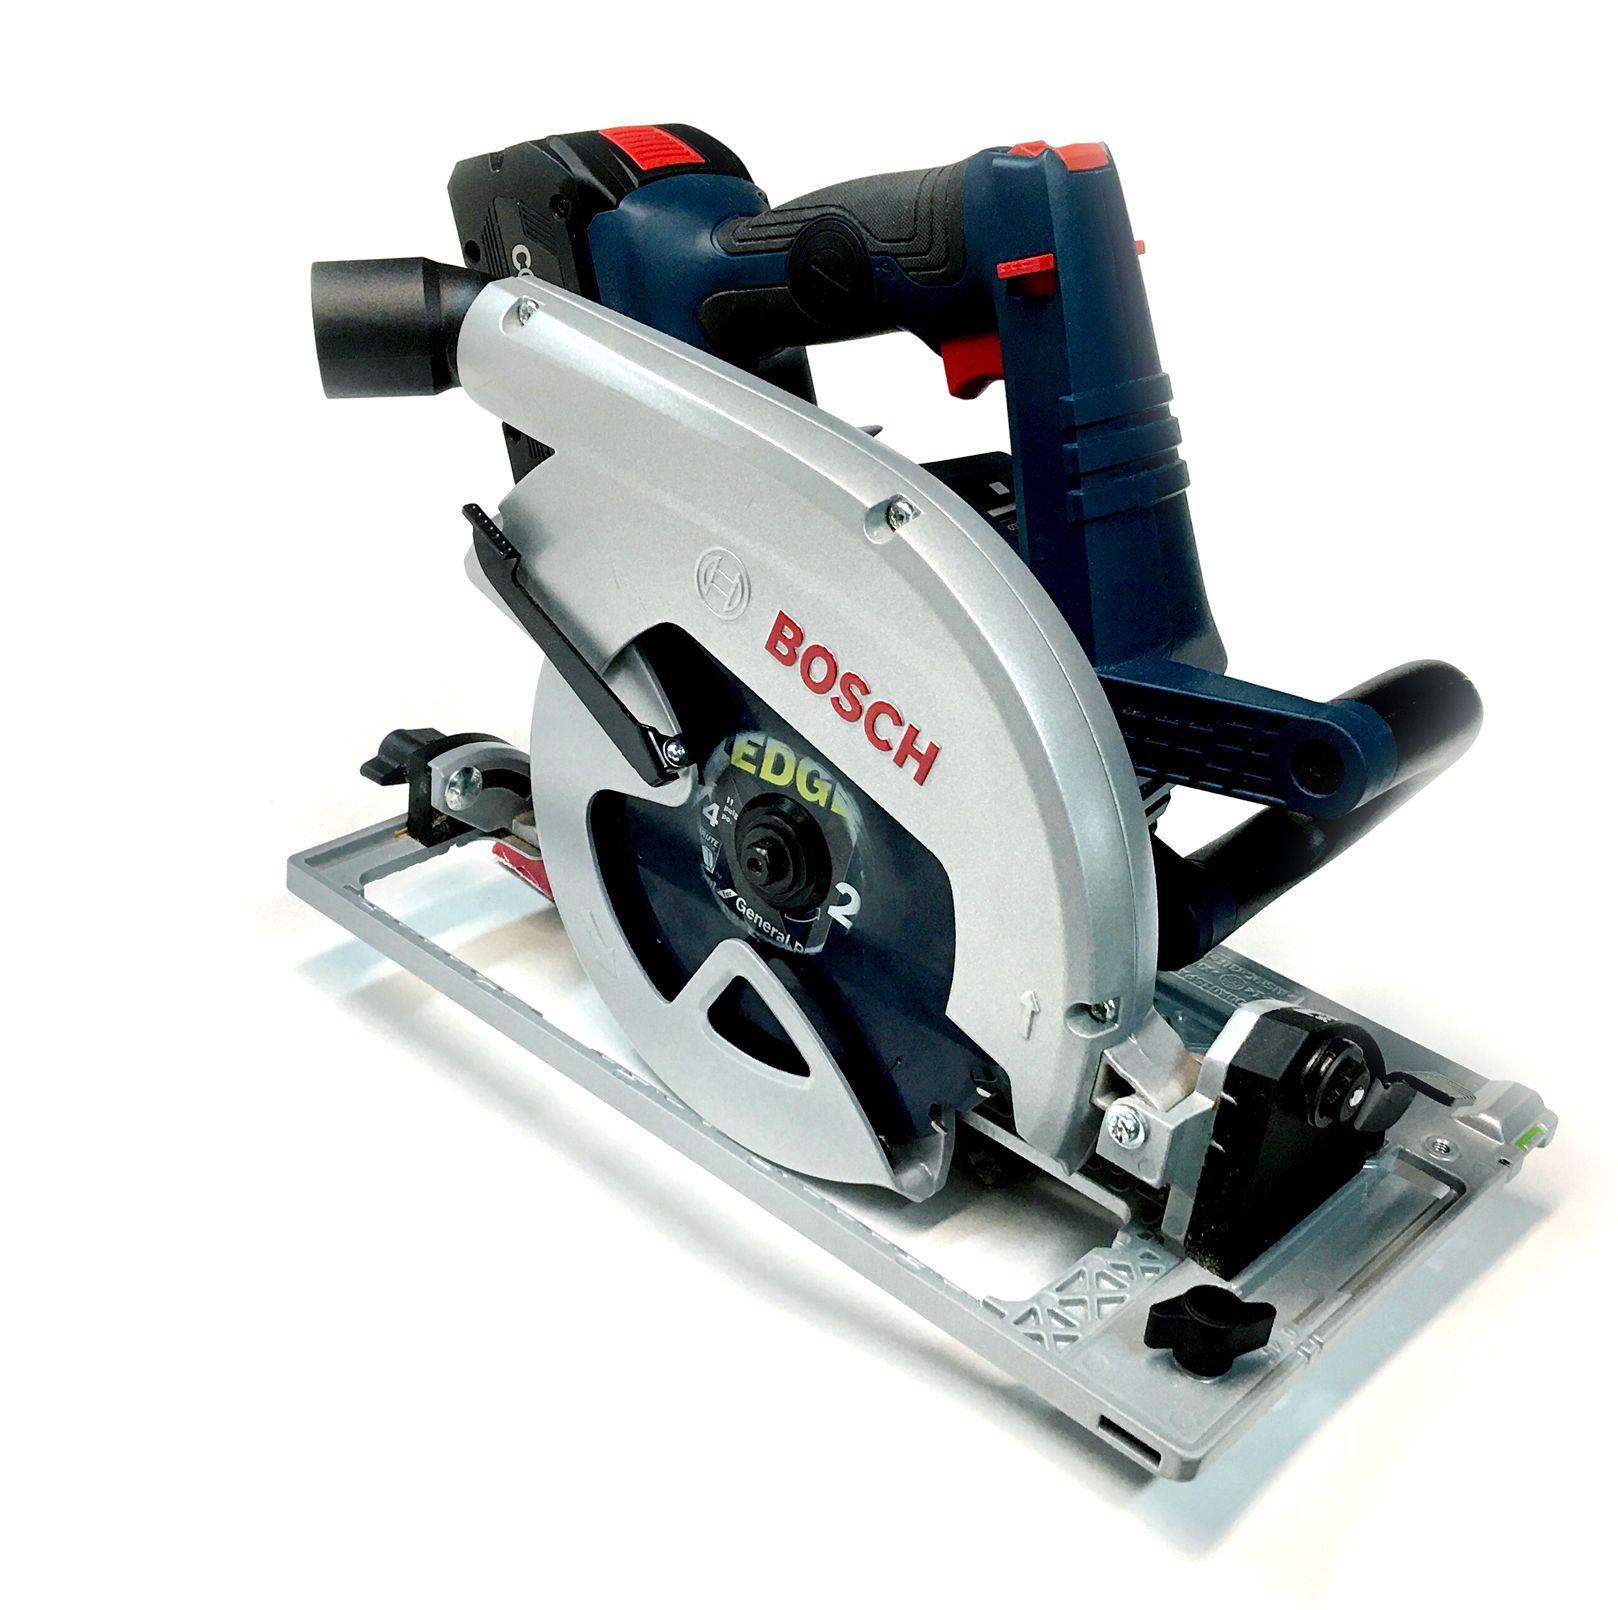 Bosch's GKS18V-25GC Circular Saw is Power-Tool Engineering at Its Best